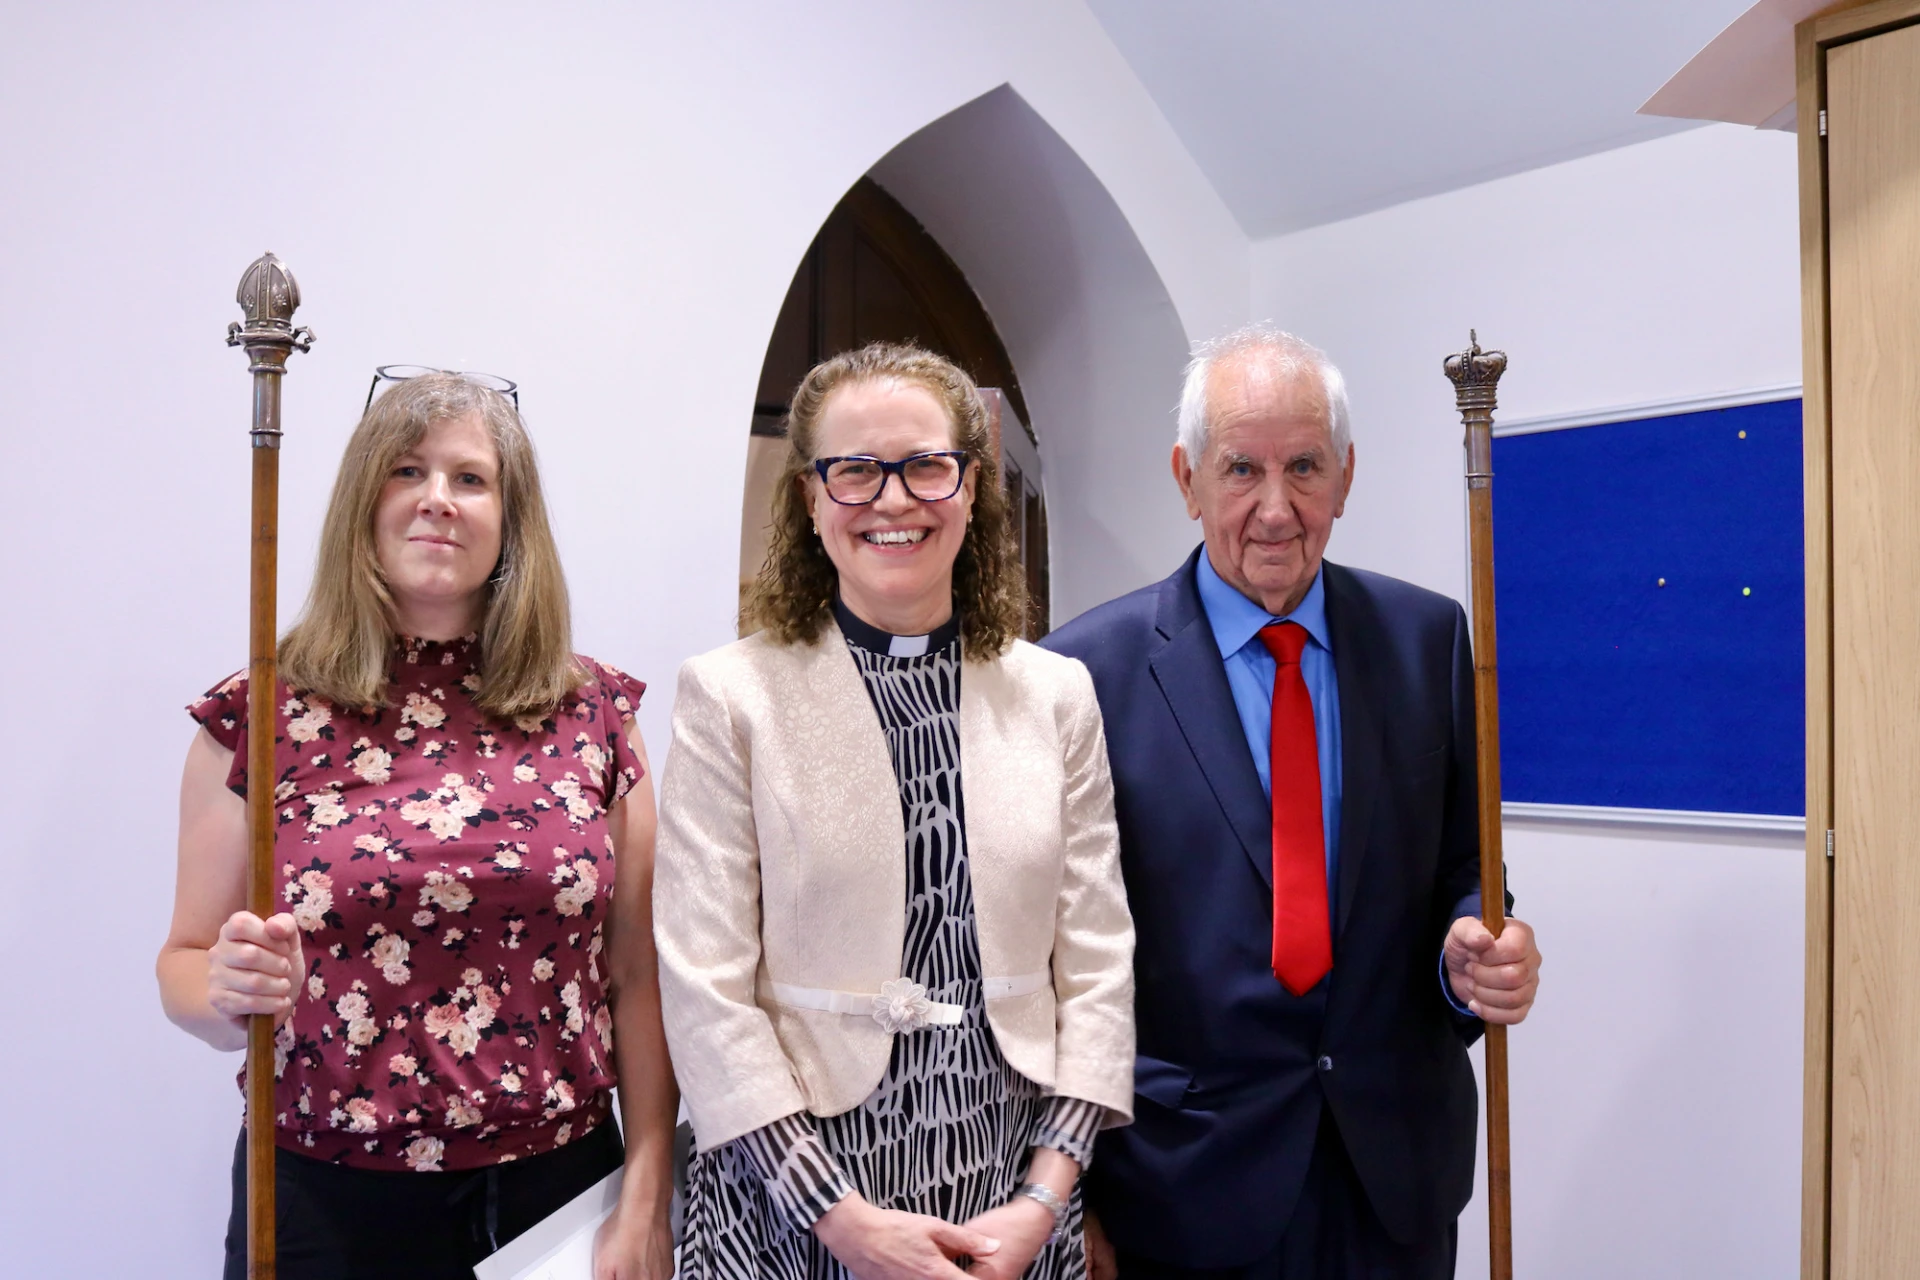 Jan with People's Churchwarden Fiona Duff and Rector's Churchwarden John Gilmore